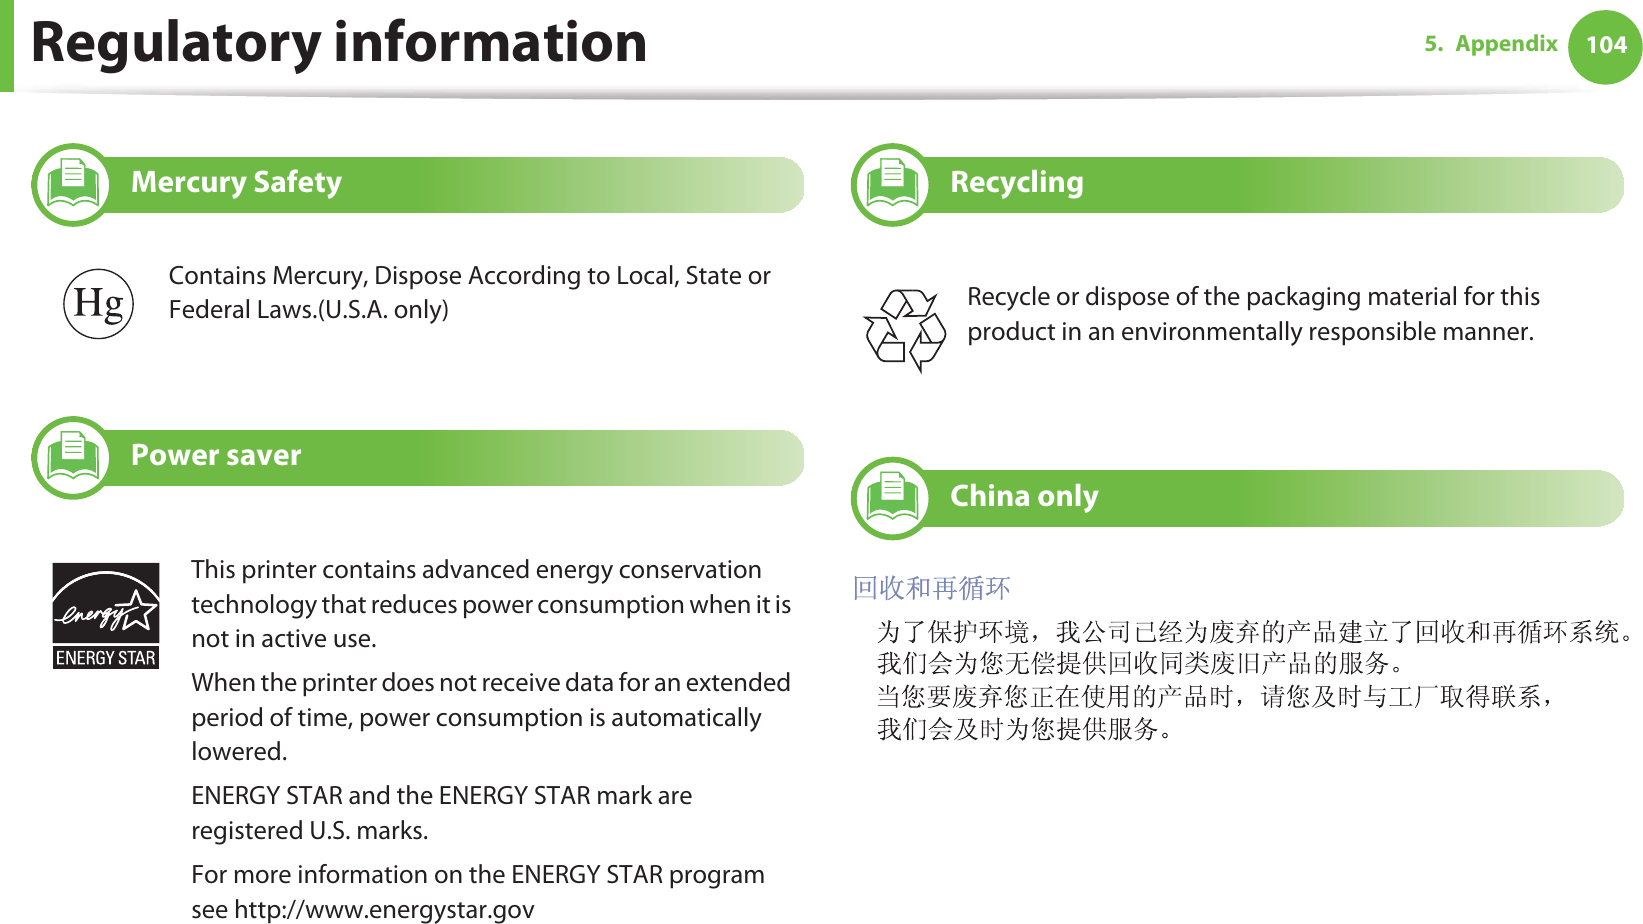 Regulatory information 1045. Appendix7 Mercury Safety8 Power saver9 Recycling10 China onlyContains Mercury, Dispose According to Local, State or Federal Laws.(U.S.A. only)This printer contains advanced energy conservation technology that reduces power consumption when it is not in active use.When the printer does not receive data for an extended period of time, power consumption is automatically lowered. ENERGY STAR and the ENERGY STAR mark are registered U.S. marks. For more information on the ENERGY STAR program see http://www.energystar.govRecycle or dispose of the packaging material for this product in an environmentally responsible manner.